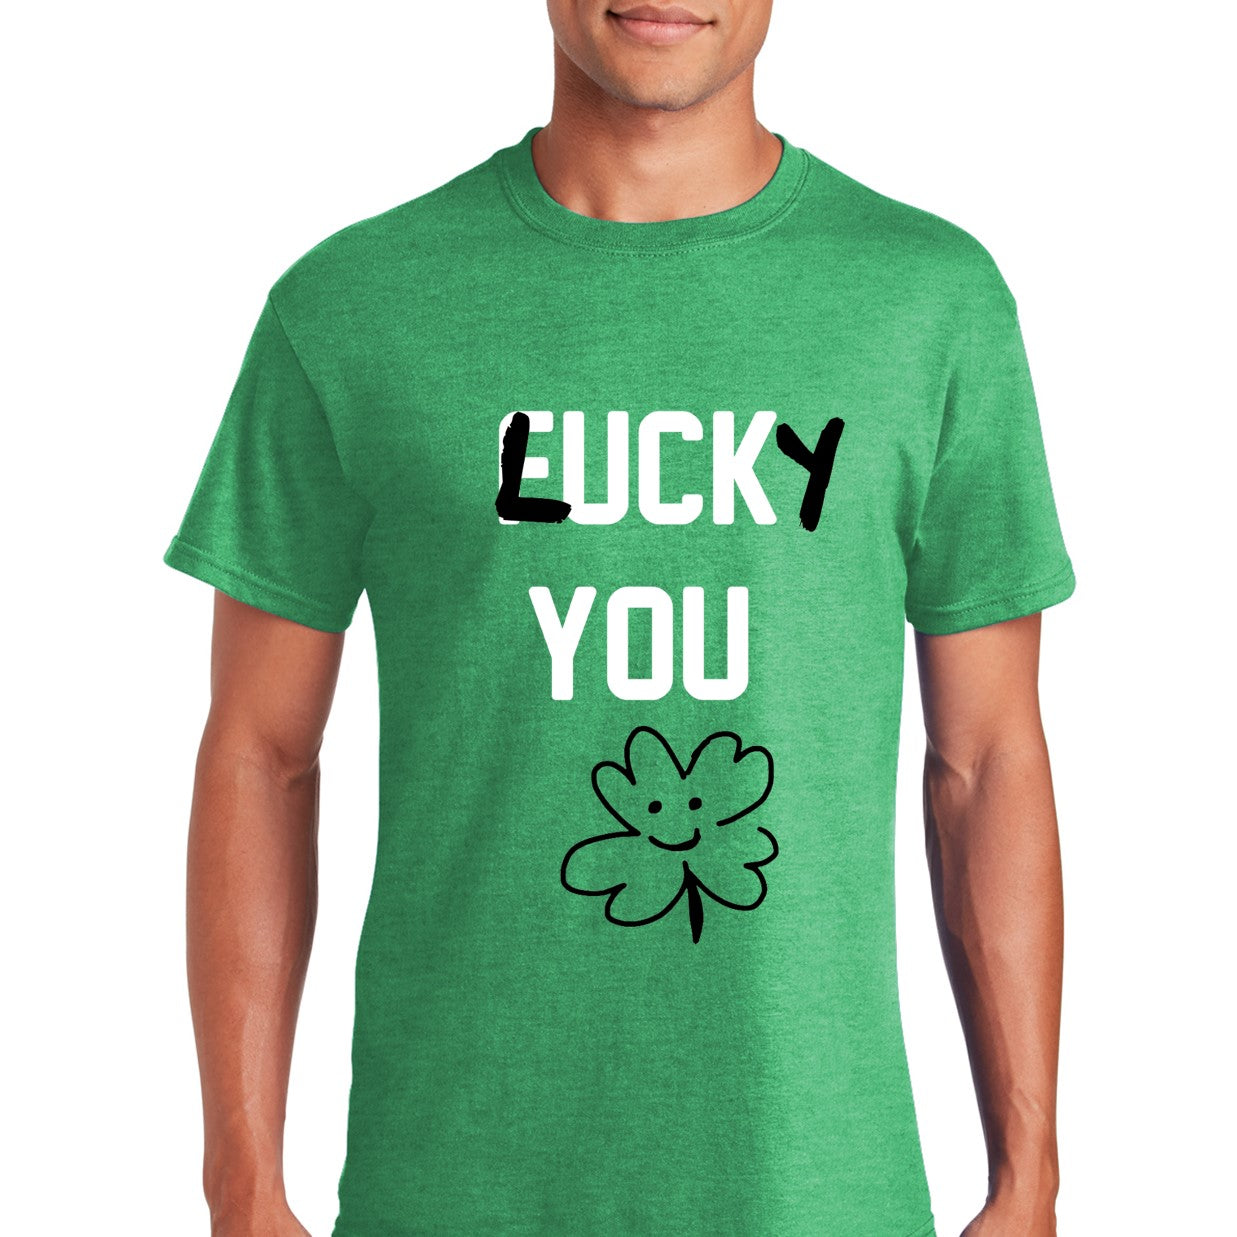 F*CK YOU/LUCKY YOU St. Patrick's Day Adult Unisex Soft Tee